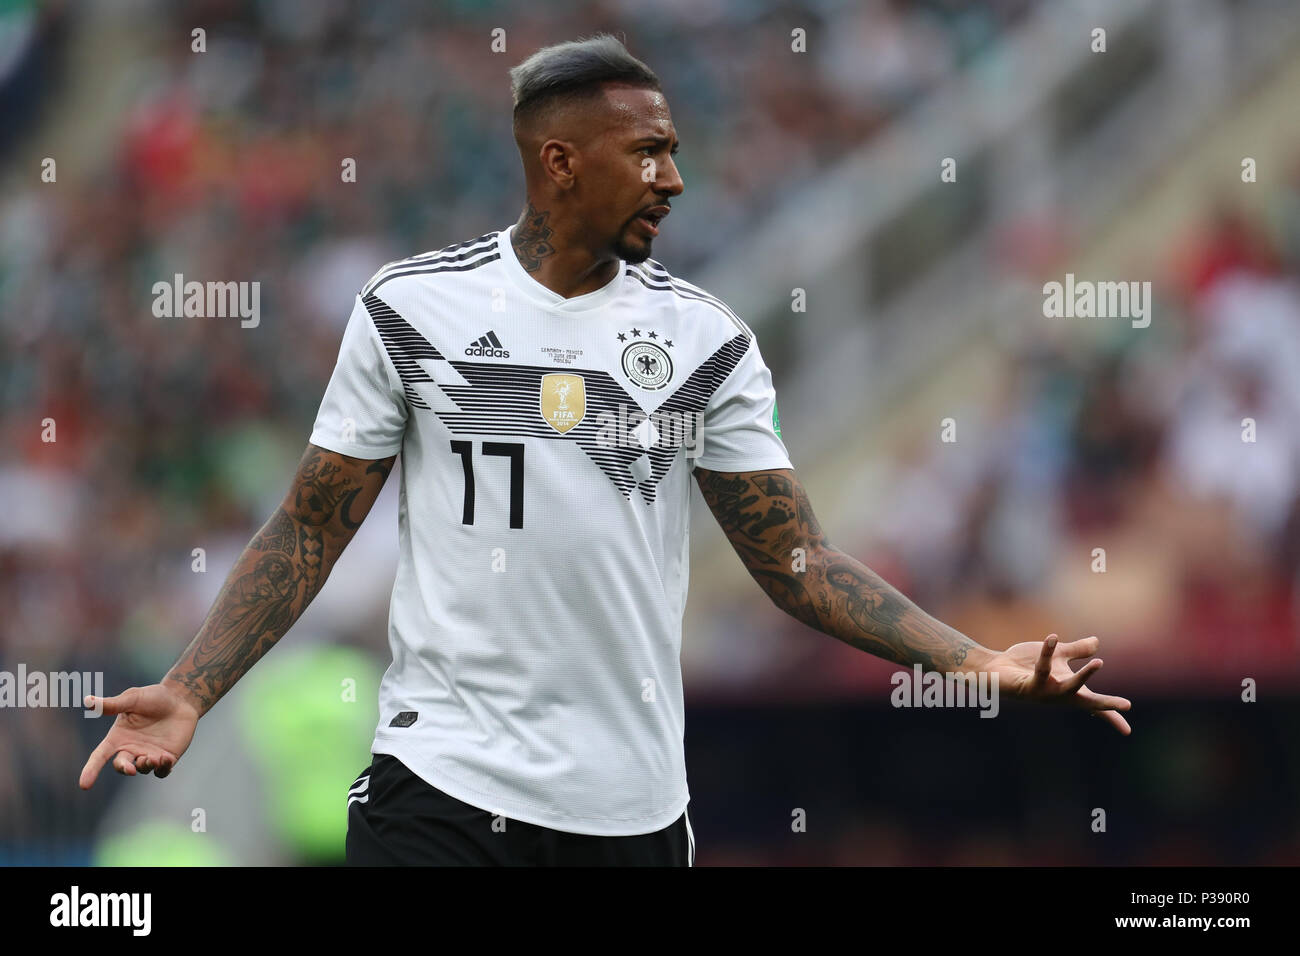 Jerome Boateng GERMANY GERMANY V MEXICO, 2018 FIFA WORLD CUP RUSSIA 17 June 2018 GBC8300 Germany v Mexico 2018 FIFA World Cup Russia STRICTLY EDITORIAL USE ONLY. If The Player/Players Depicted In This Image Is/Are Playing For An English Club Or The England National Team. Then This Image May Only Be Used For Editorial Purposes. No Commercial Use. The Following Usages Are Also Restricted EVEN IF IN AN EDITORIAL CONTEXT: Use in conjuction with, or part of, any unauthorized audio, video, data, fixture lists, club/league logos, Betting, Games or any 'live' services. Also Restr Stock Photo